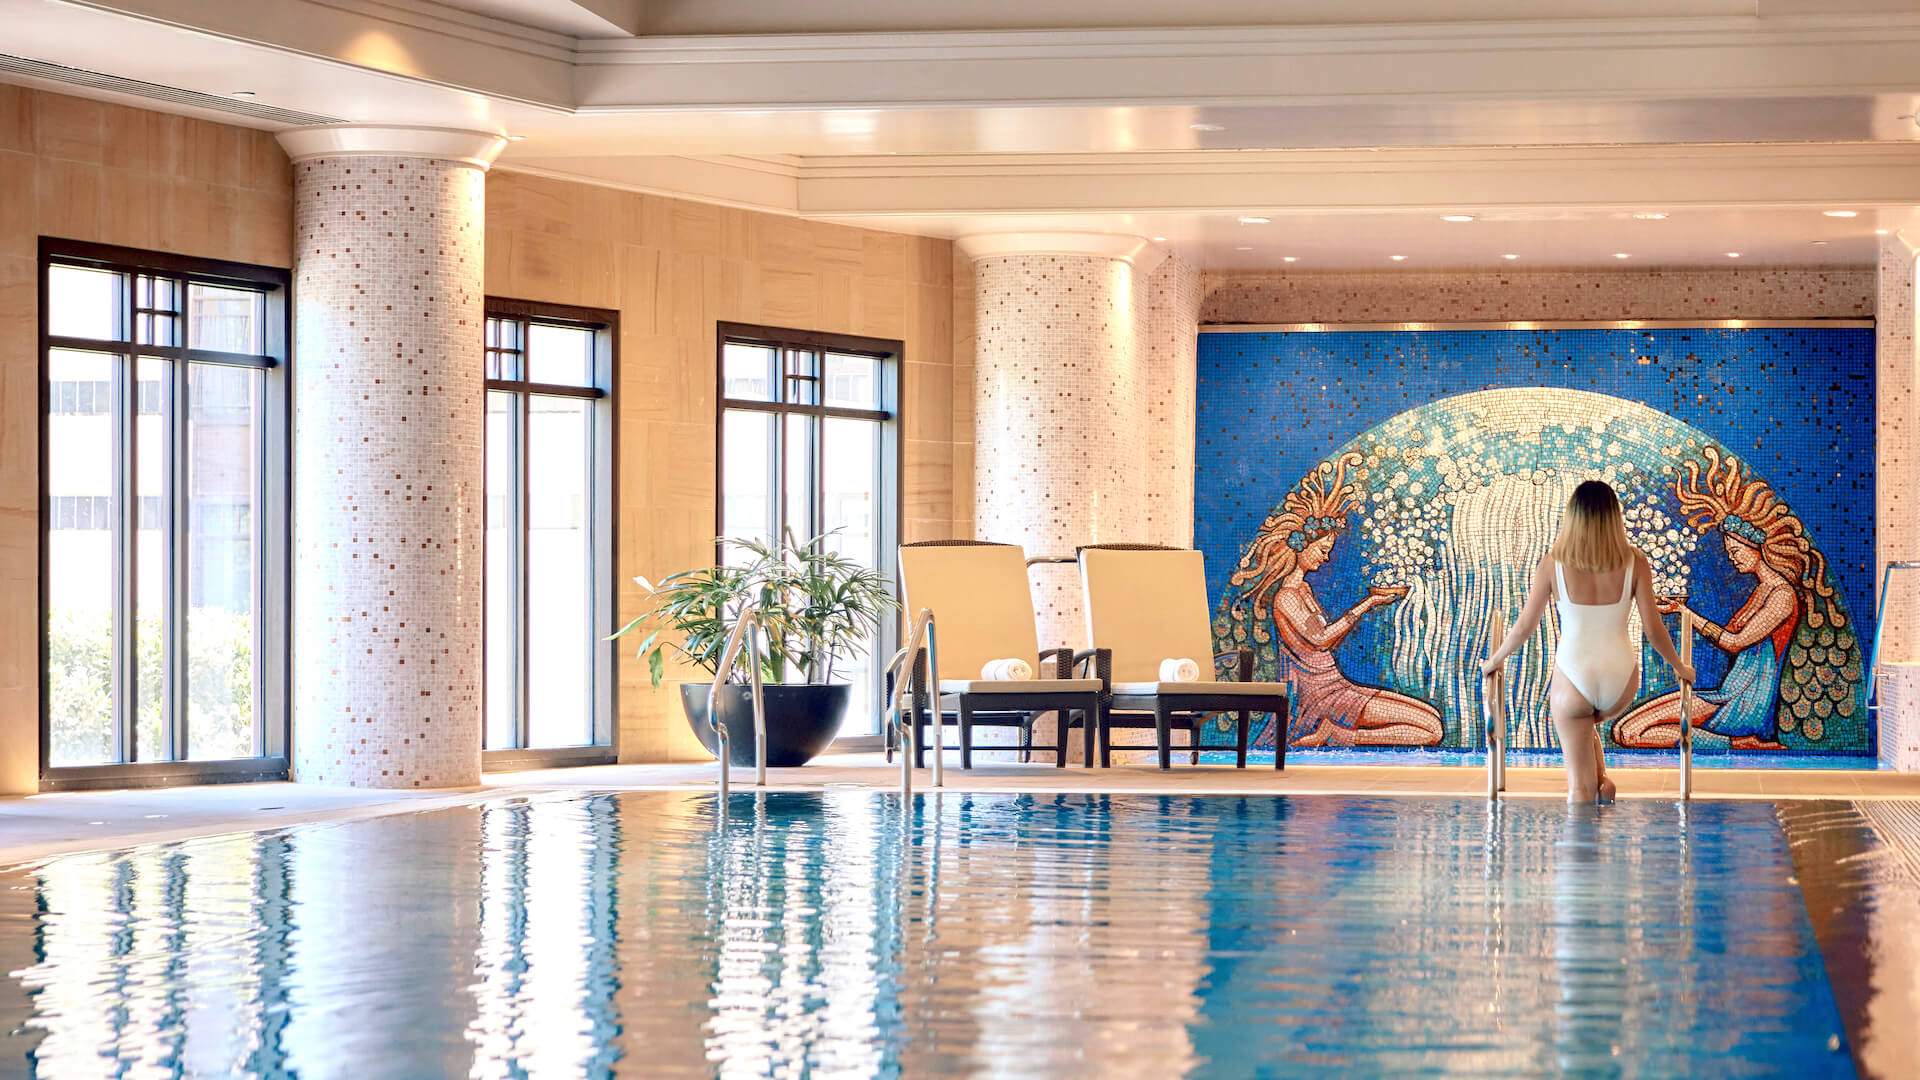 Pool and Spa at the park Hyatt Hotel - home to one of the best spas in Melbourne.